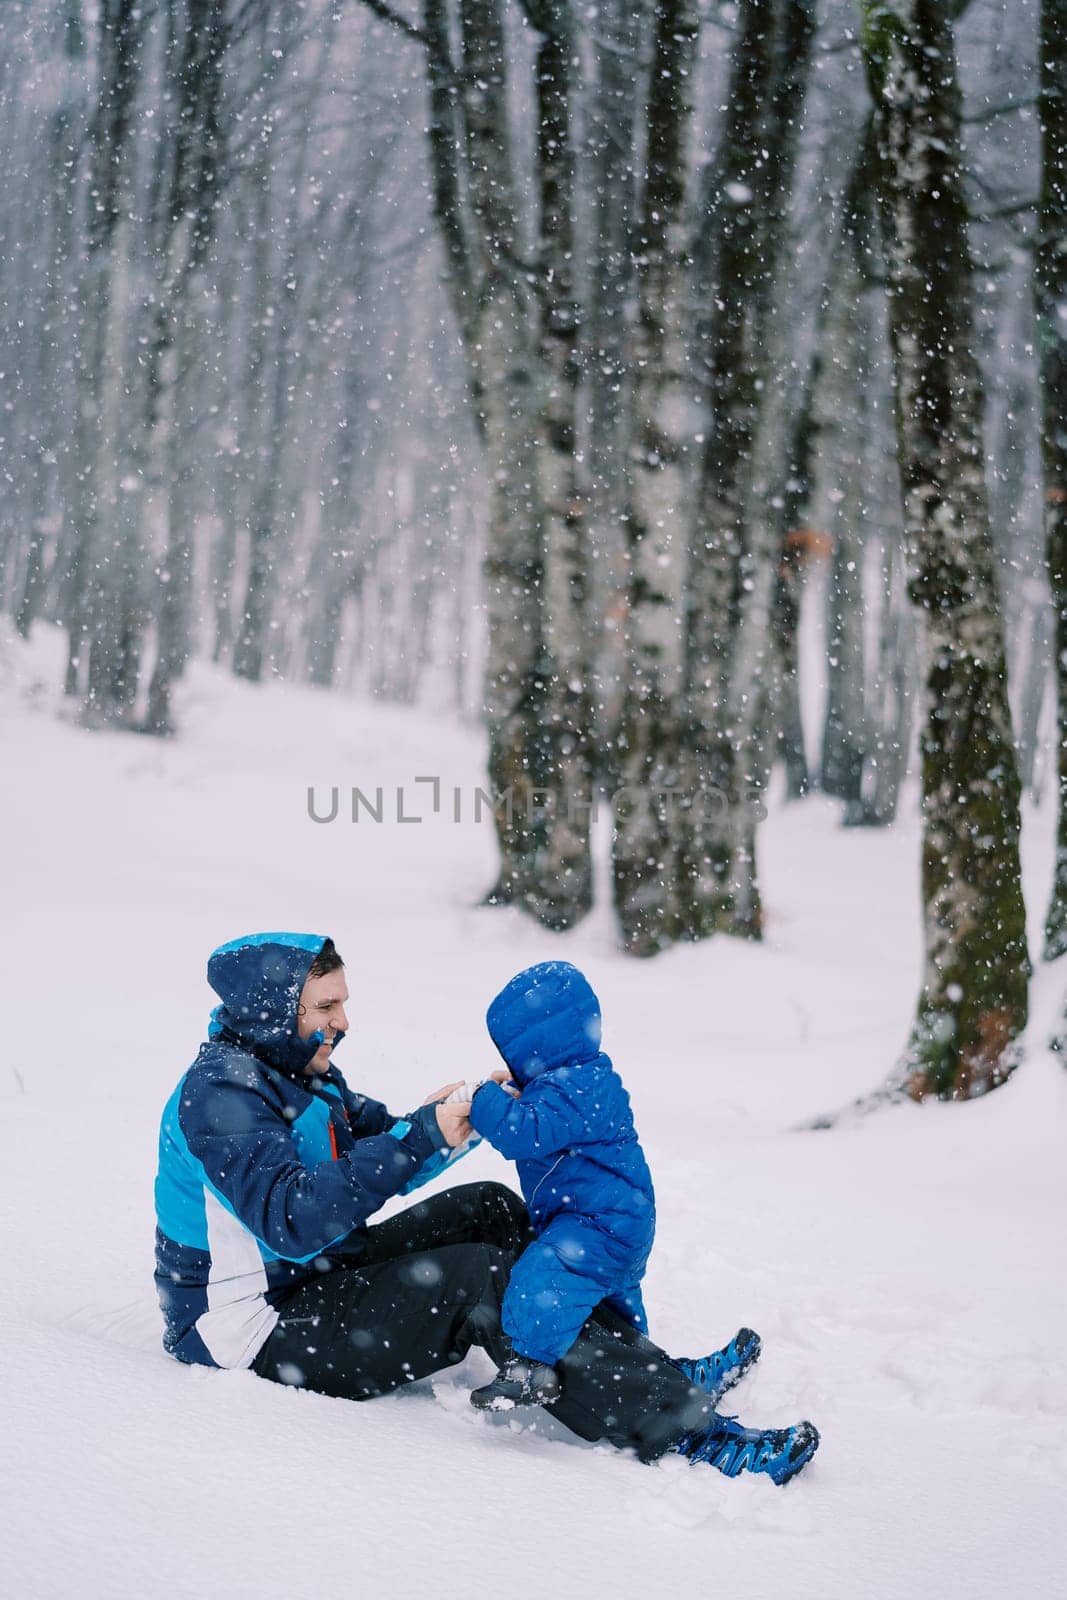 Laughing dad holds the hands of a small child sitting on his lap during a snowfall in the forest. High quality photo